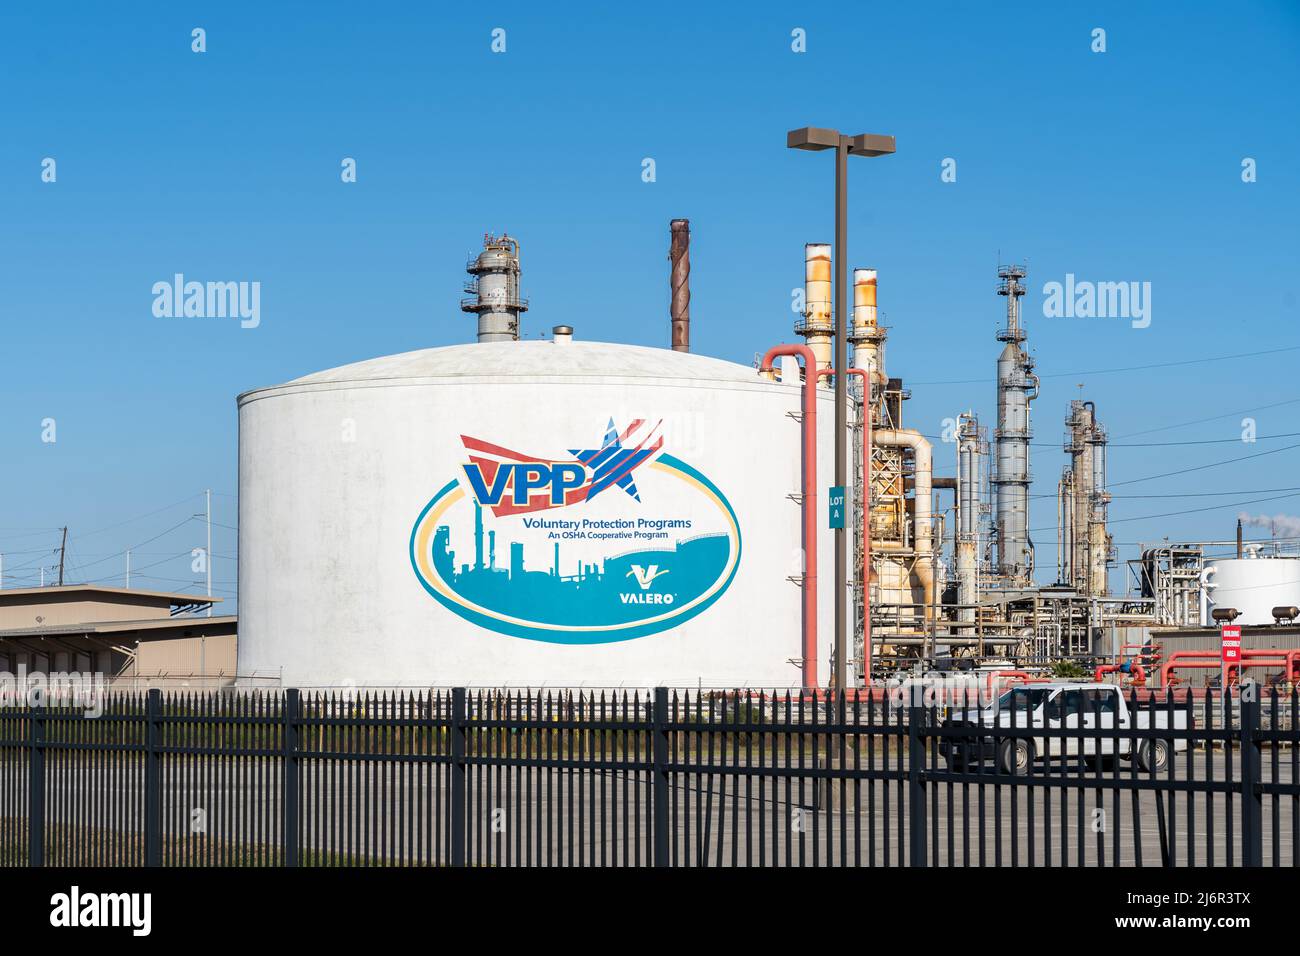 Texas City, TX, USA - February 12, 2022: The VPP sign on the oil tank in a Refinery . Stock Photo